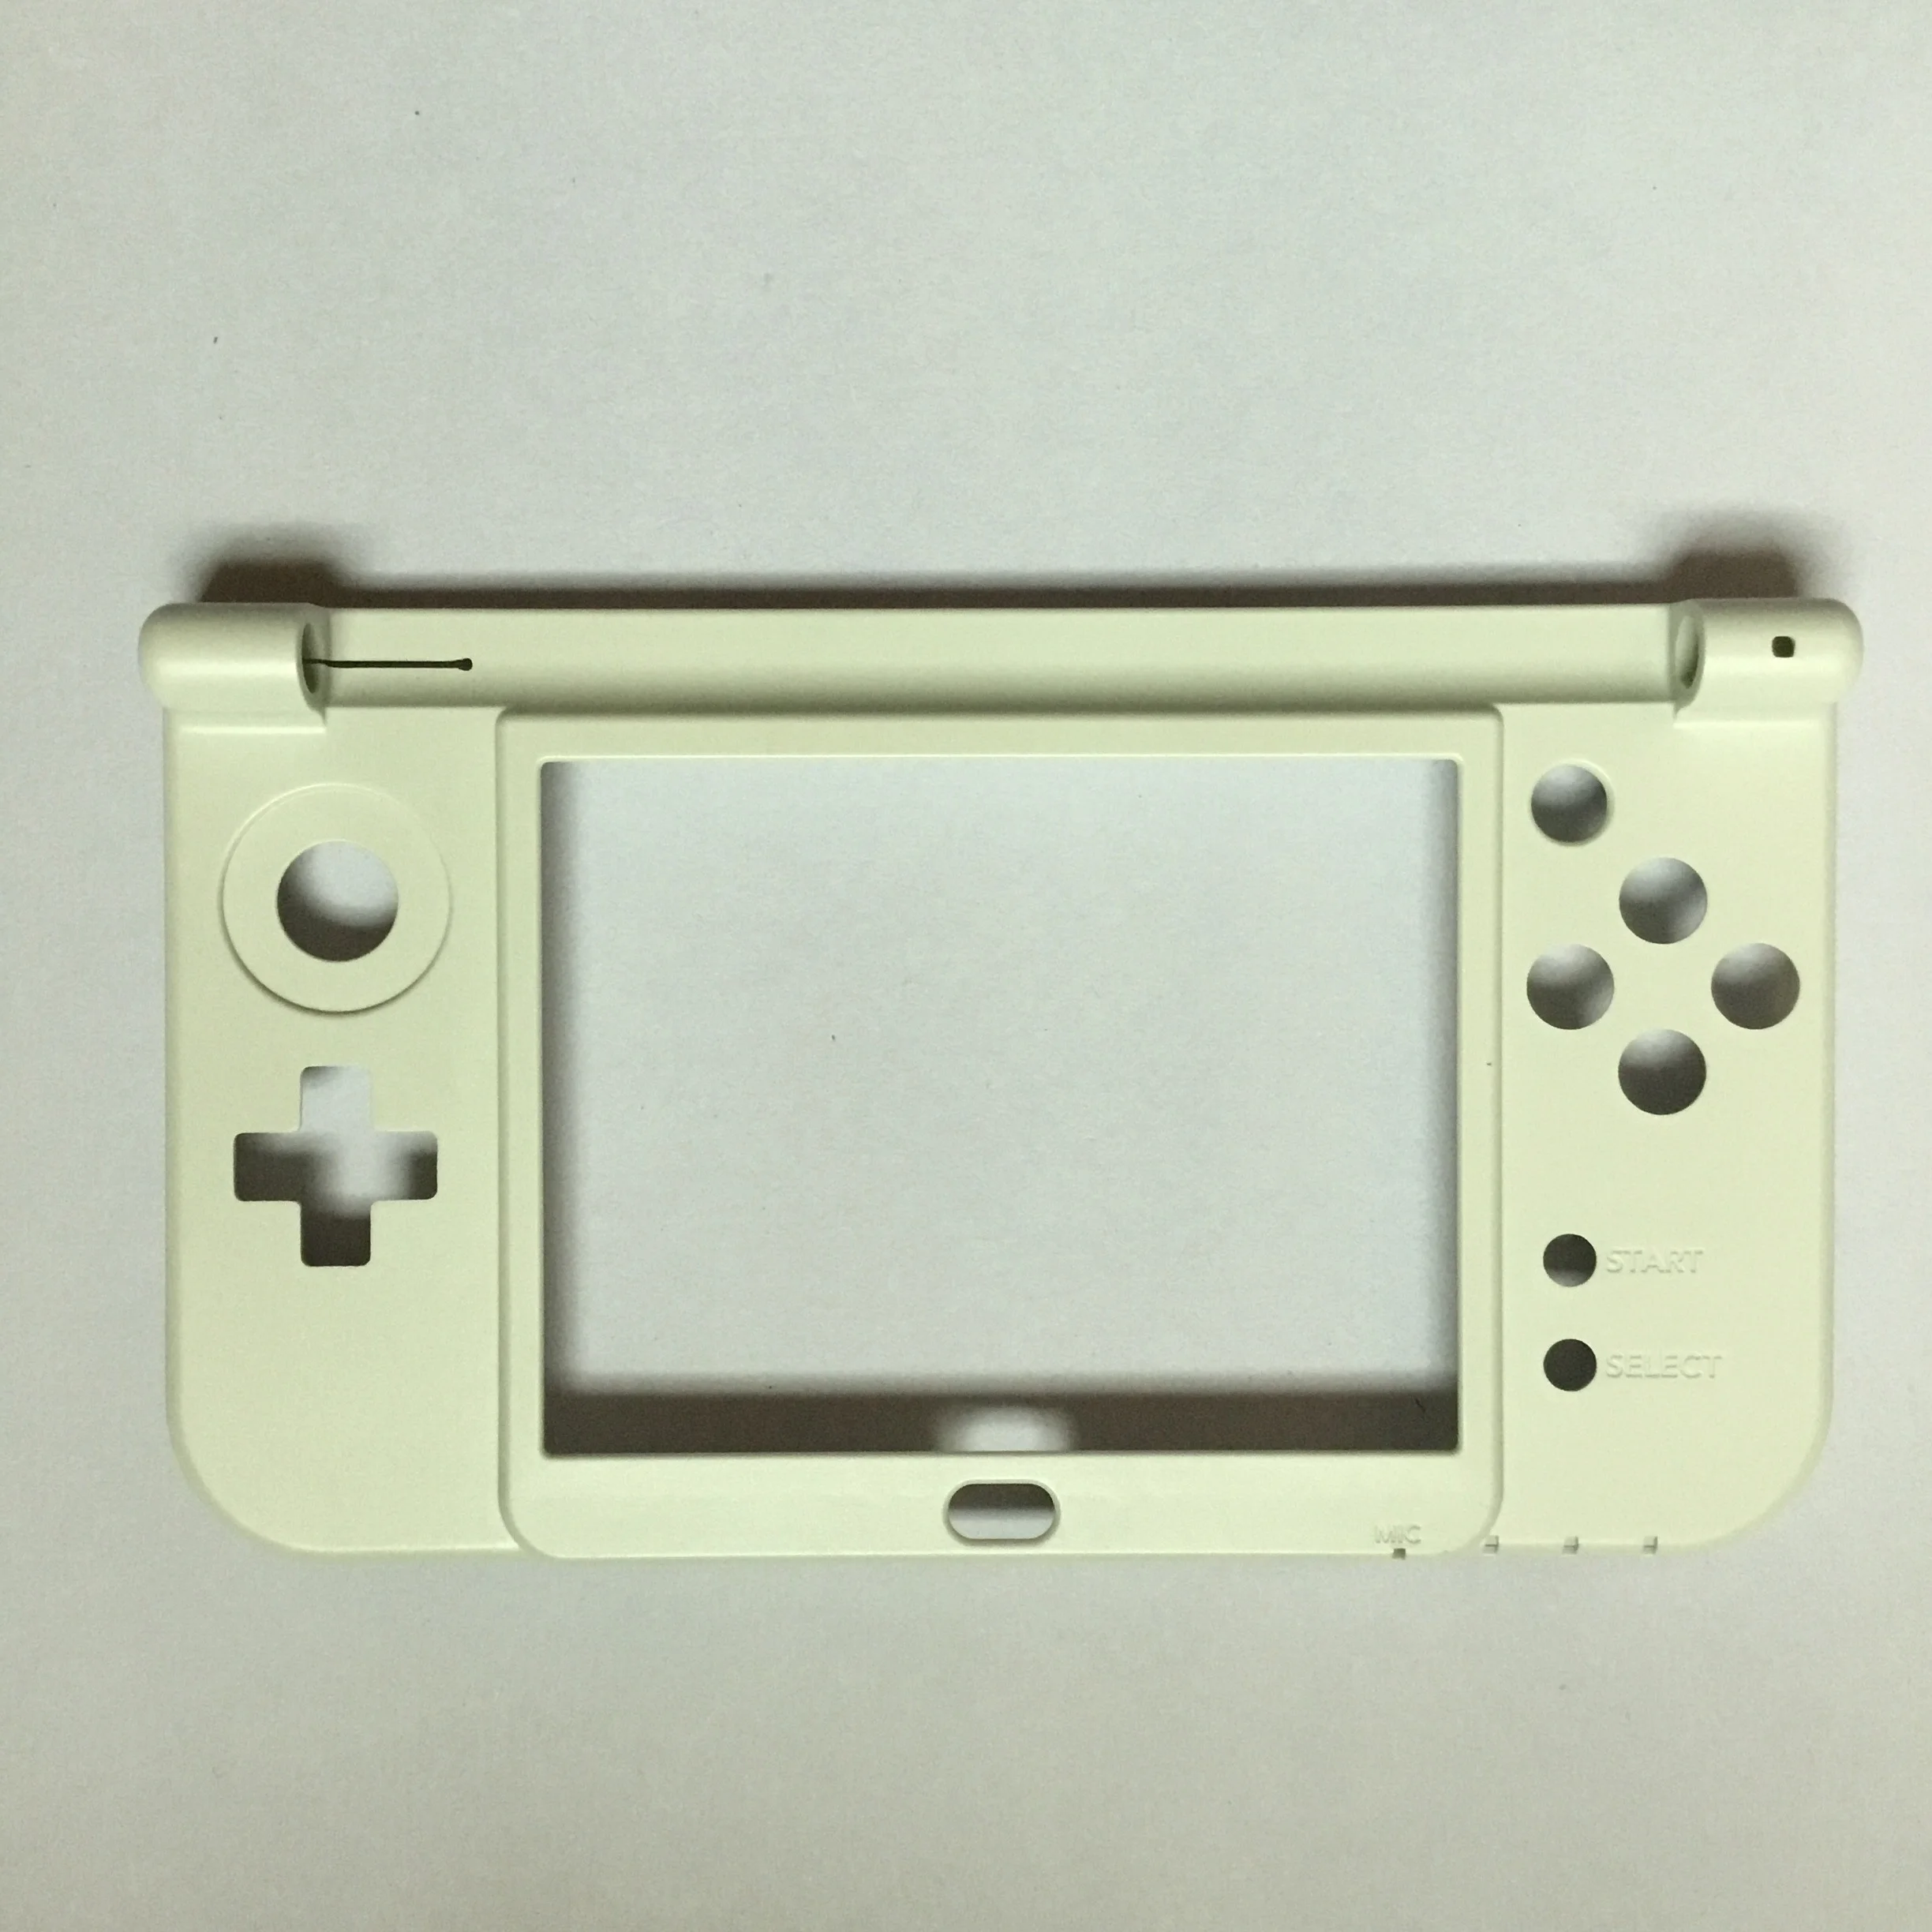 For New 3dsxl Shell Bottom Middle Housing For Nintendo New 3ds Xl Shell White Replacement Part Buy For New 3dsxl Shell Housing For Nintendo New 3ds Xl For Nintendo New 3ds Xl Shell